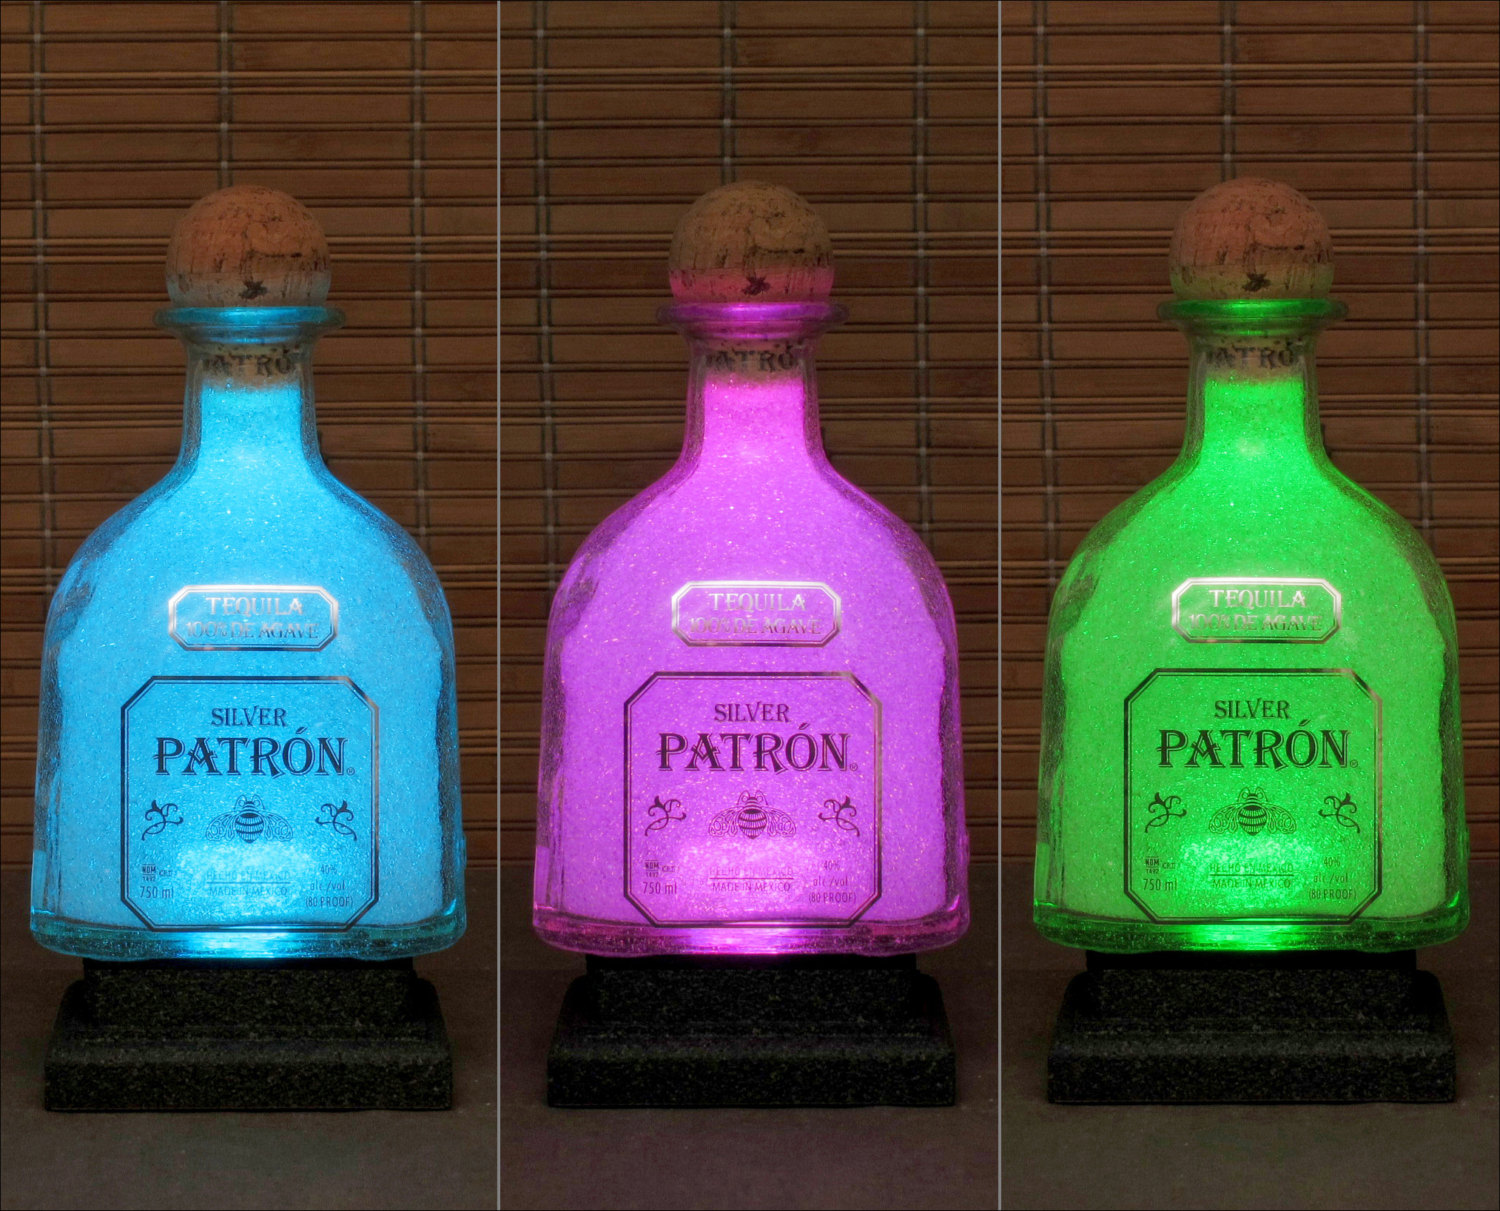 Patron Silver Tequila Controlled 16 Color Changing LED Liquor Bottle Lamp Light Man on Luulla